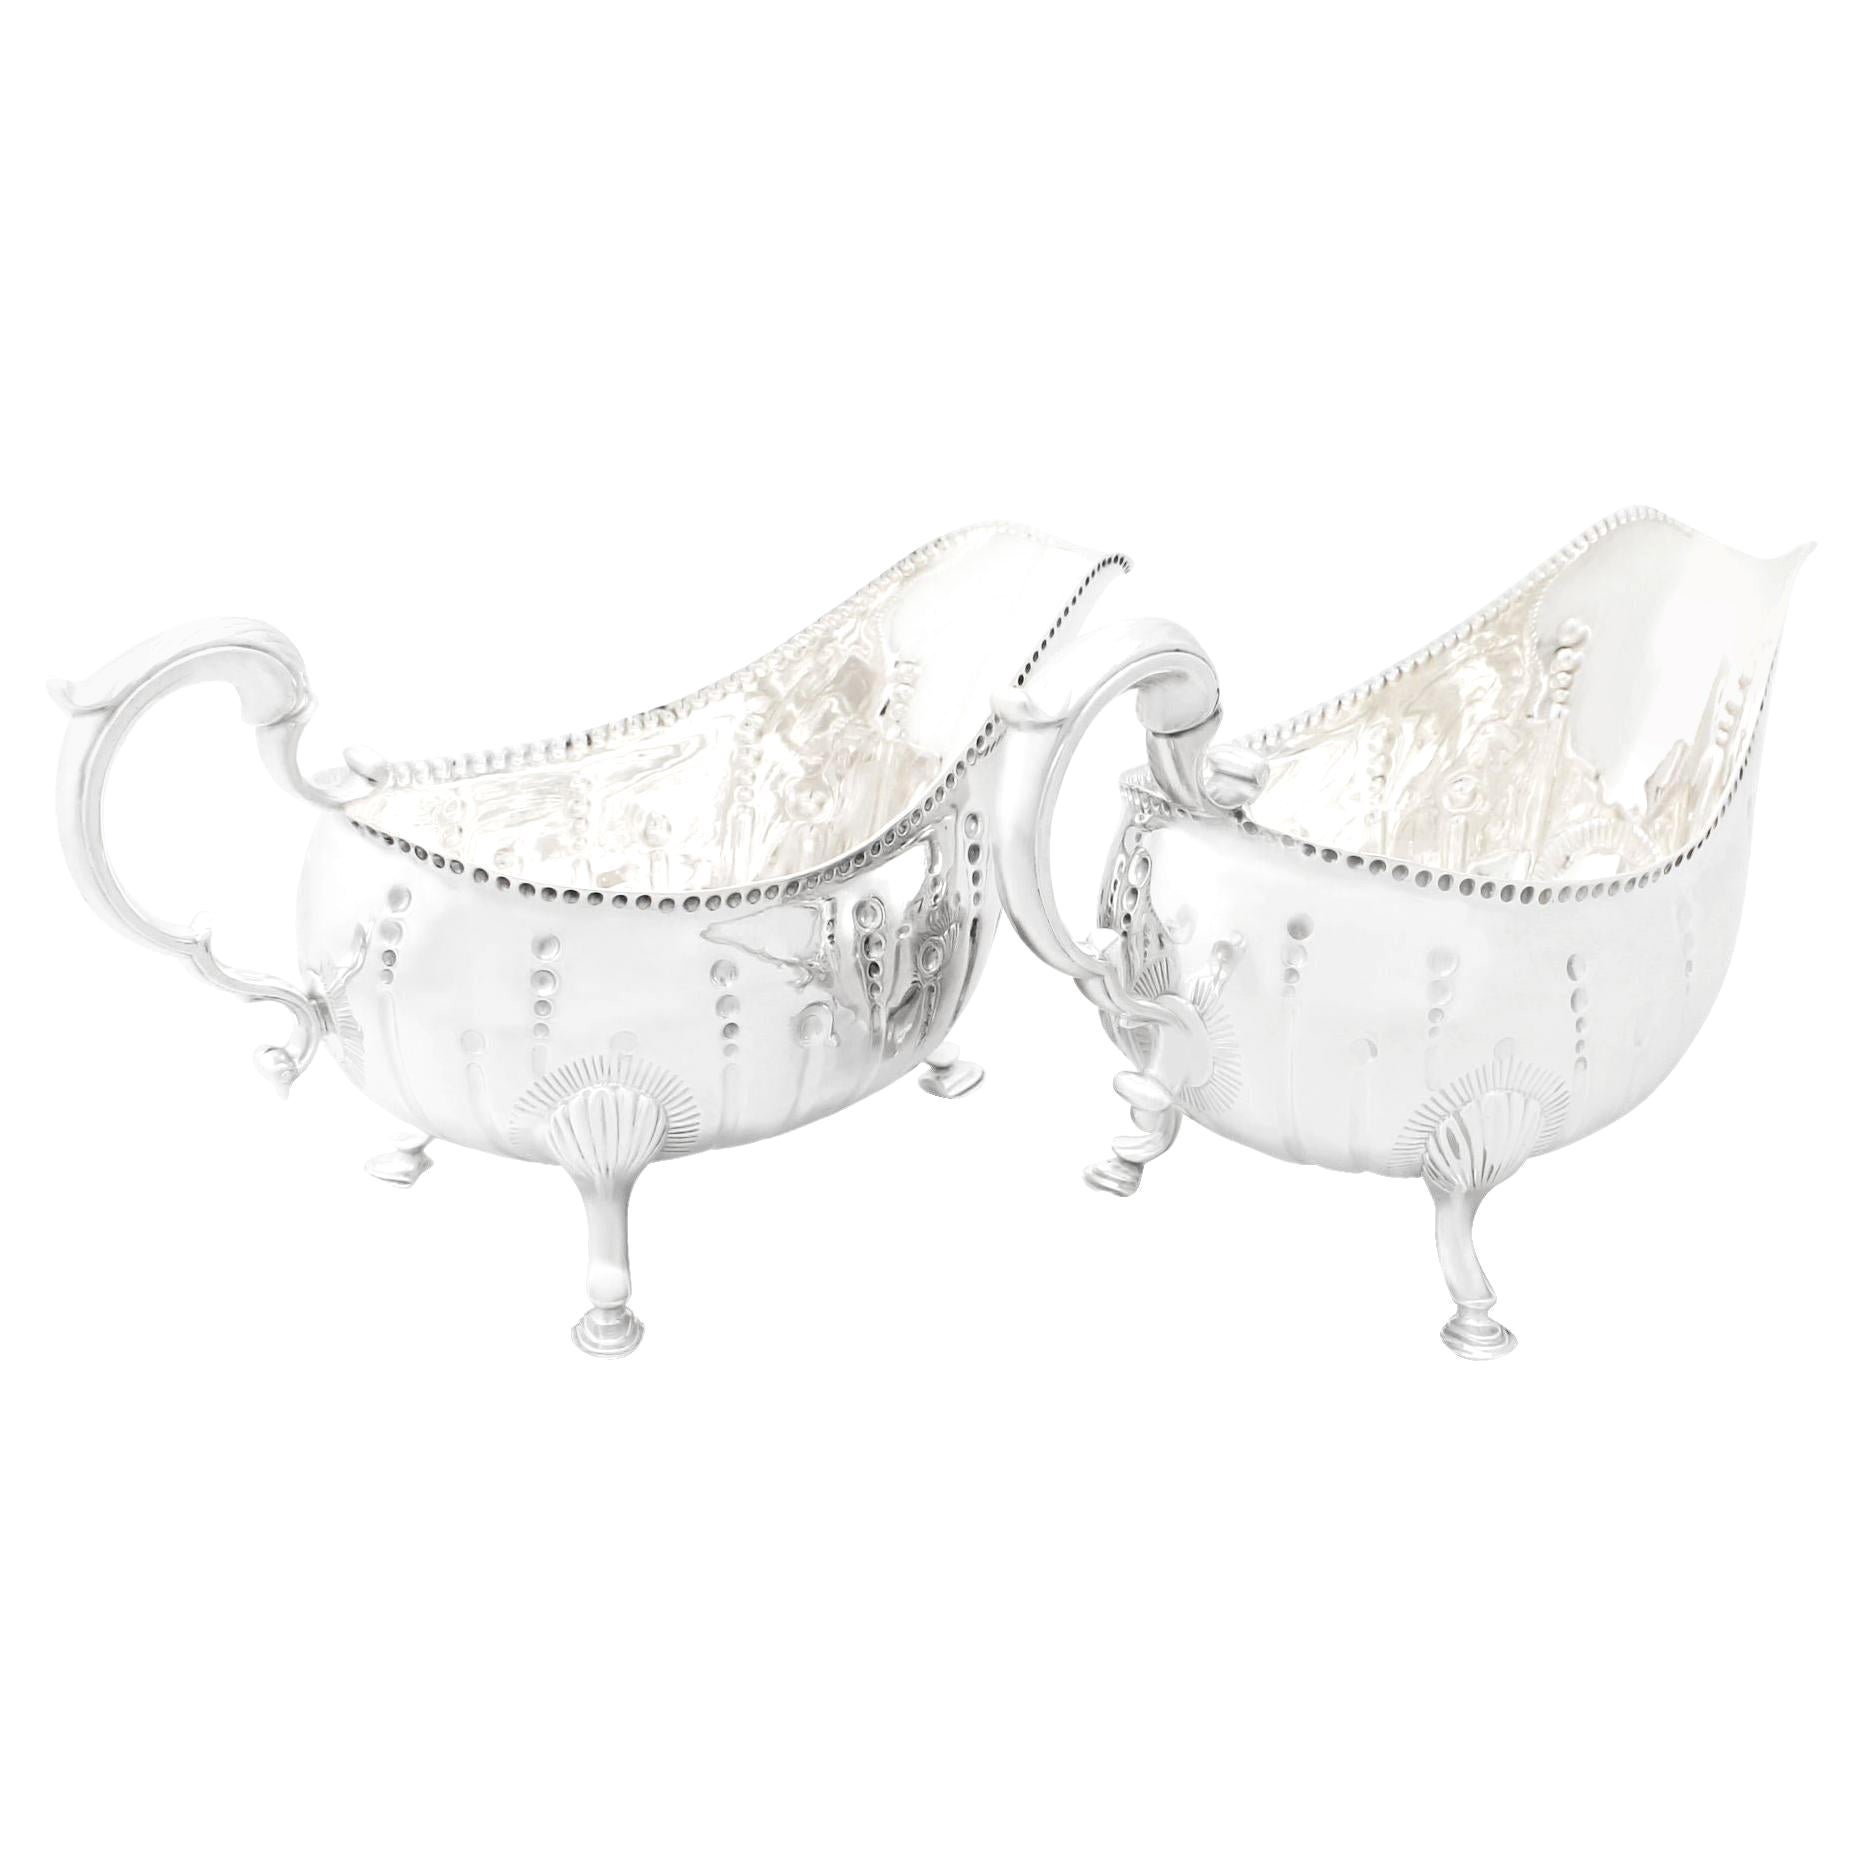 Antique Georgian 1780 Sterling Silver Sauceboats or Gravy Boats For Sale